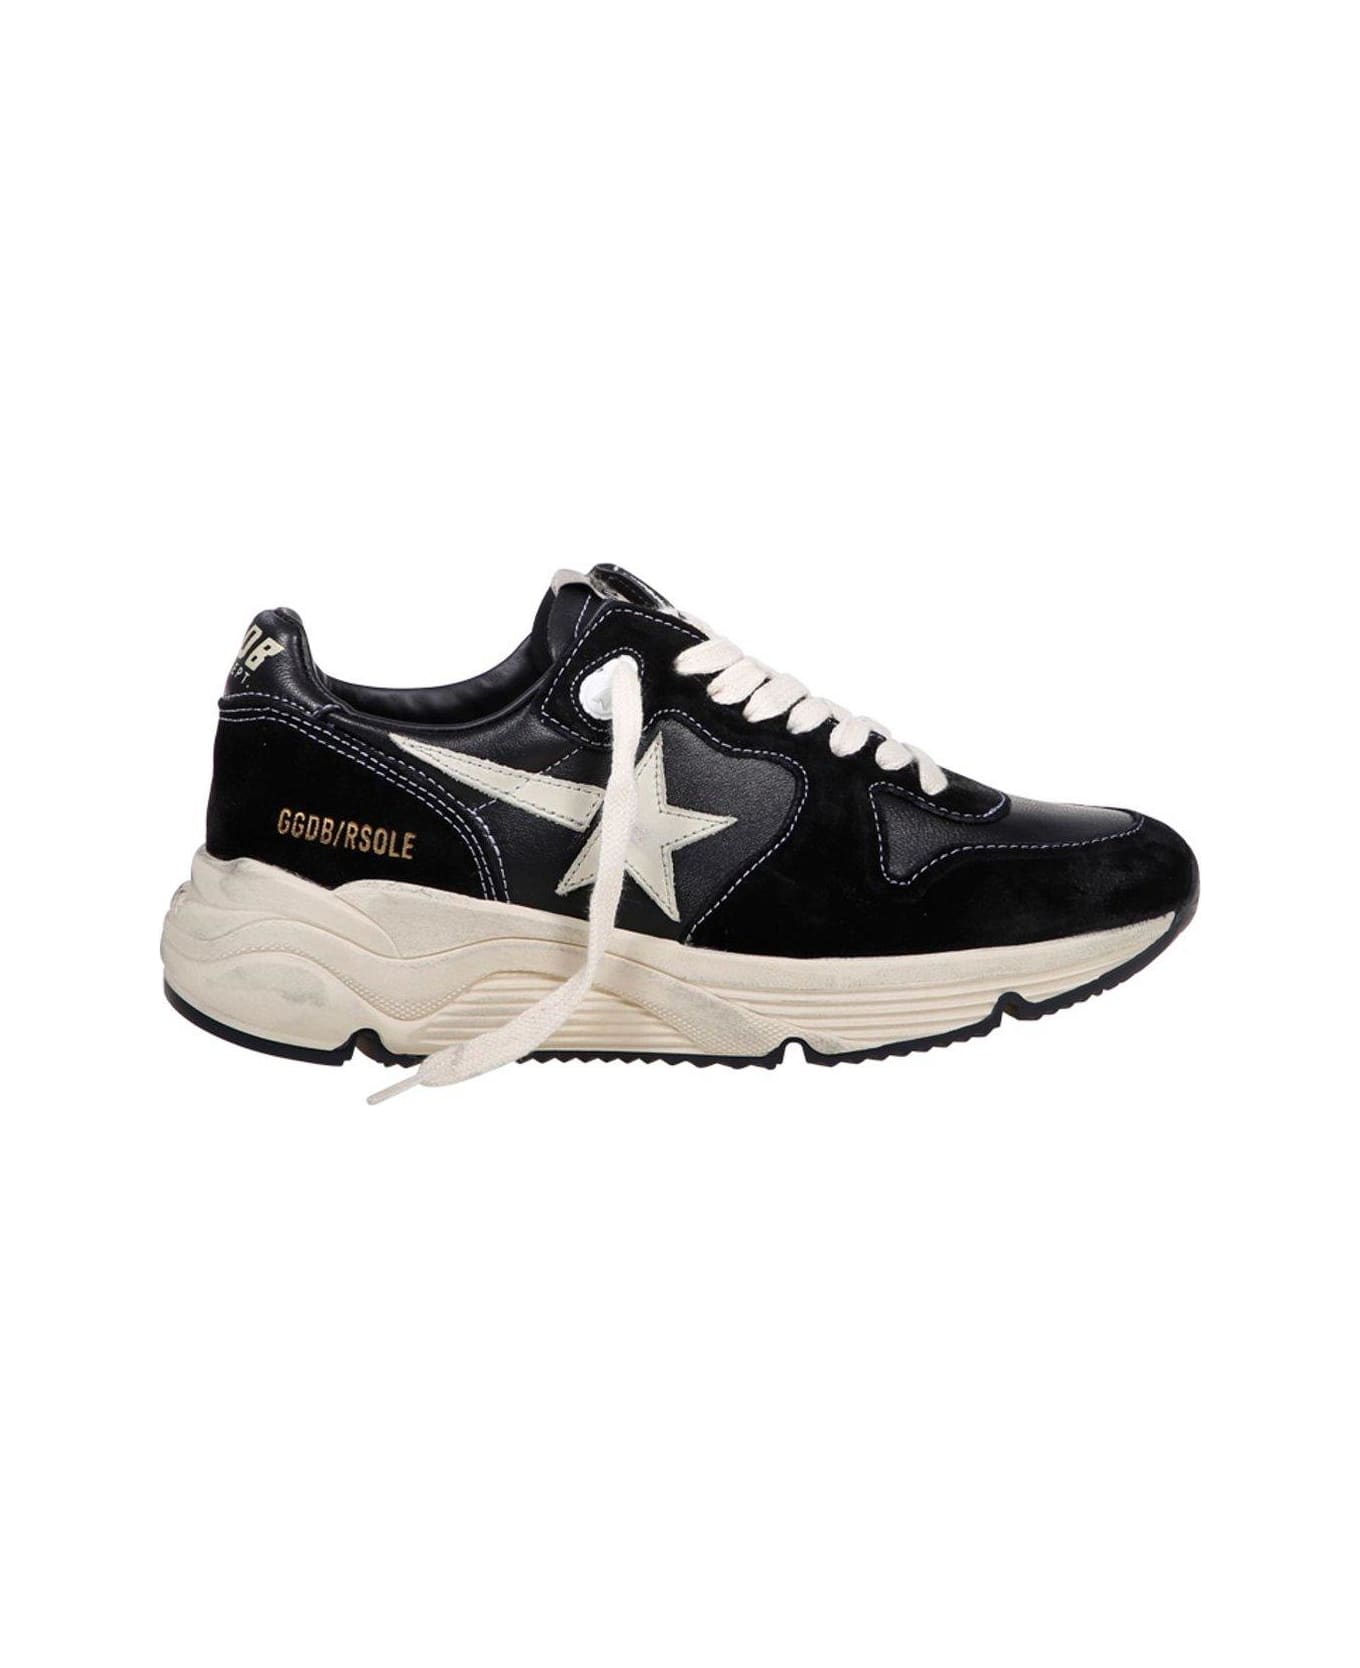 Golden Goose Running Sneakers In Black Suede And Leather - Black